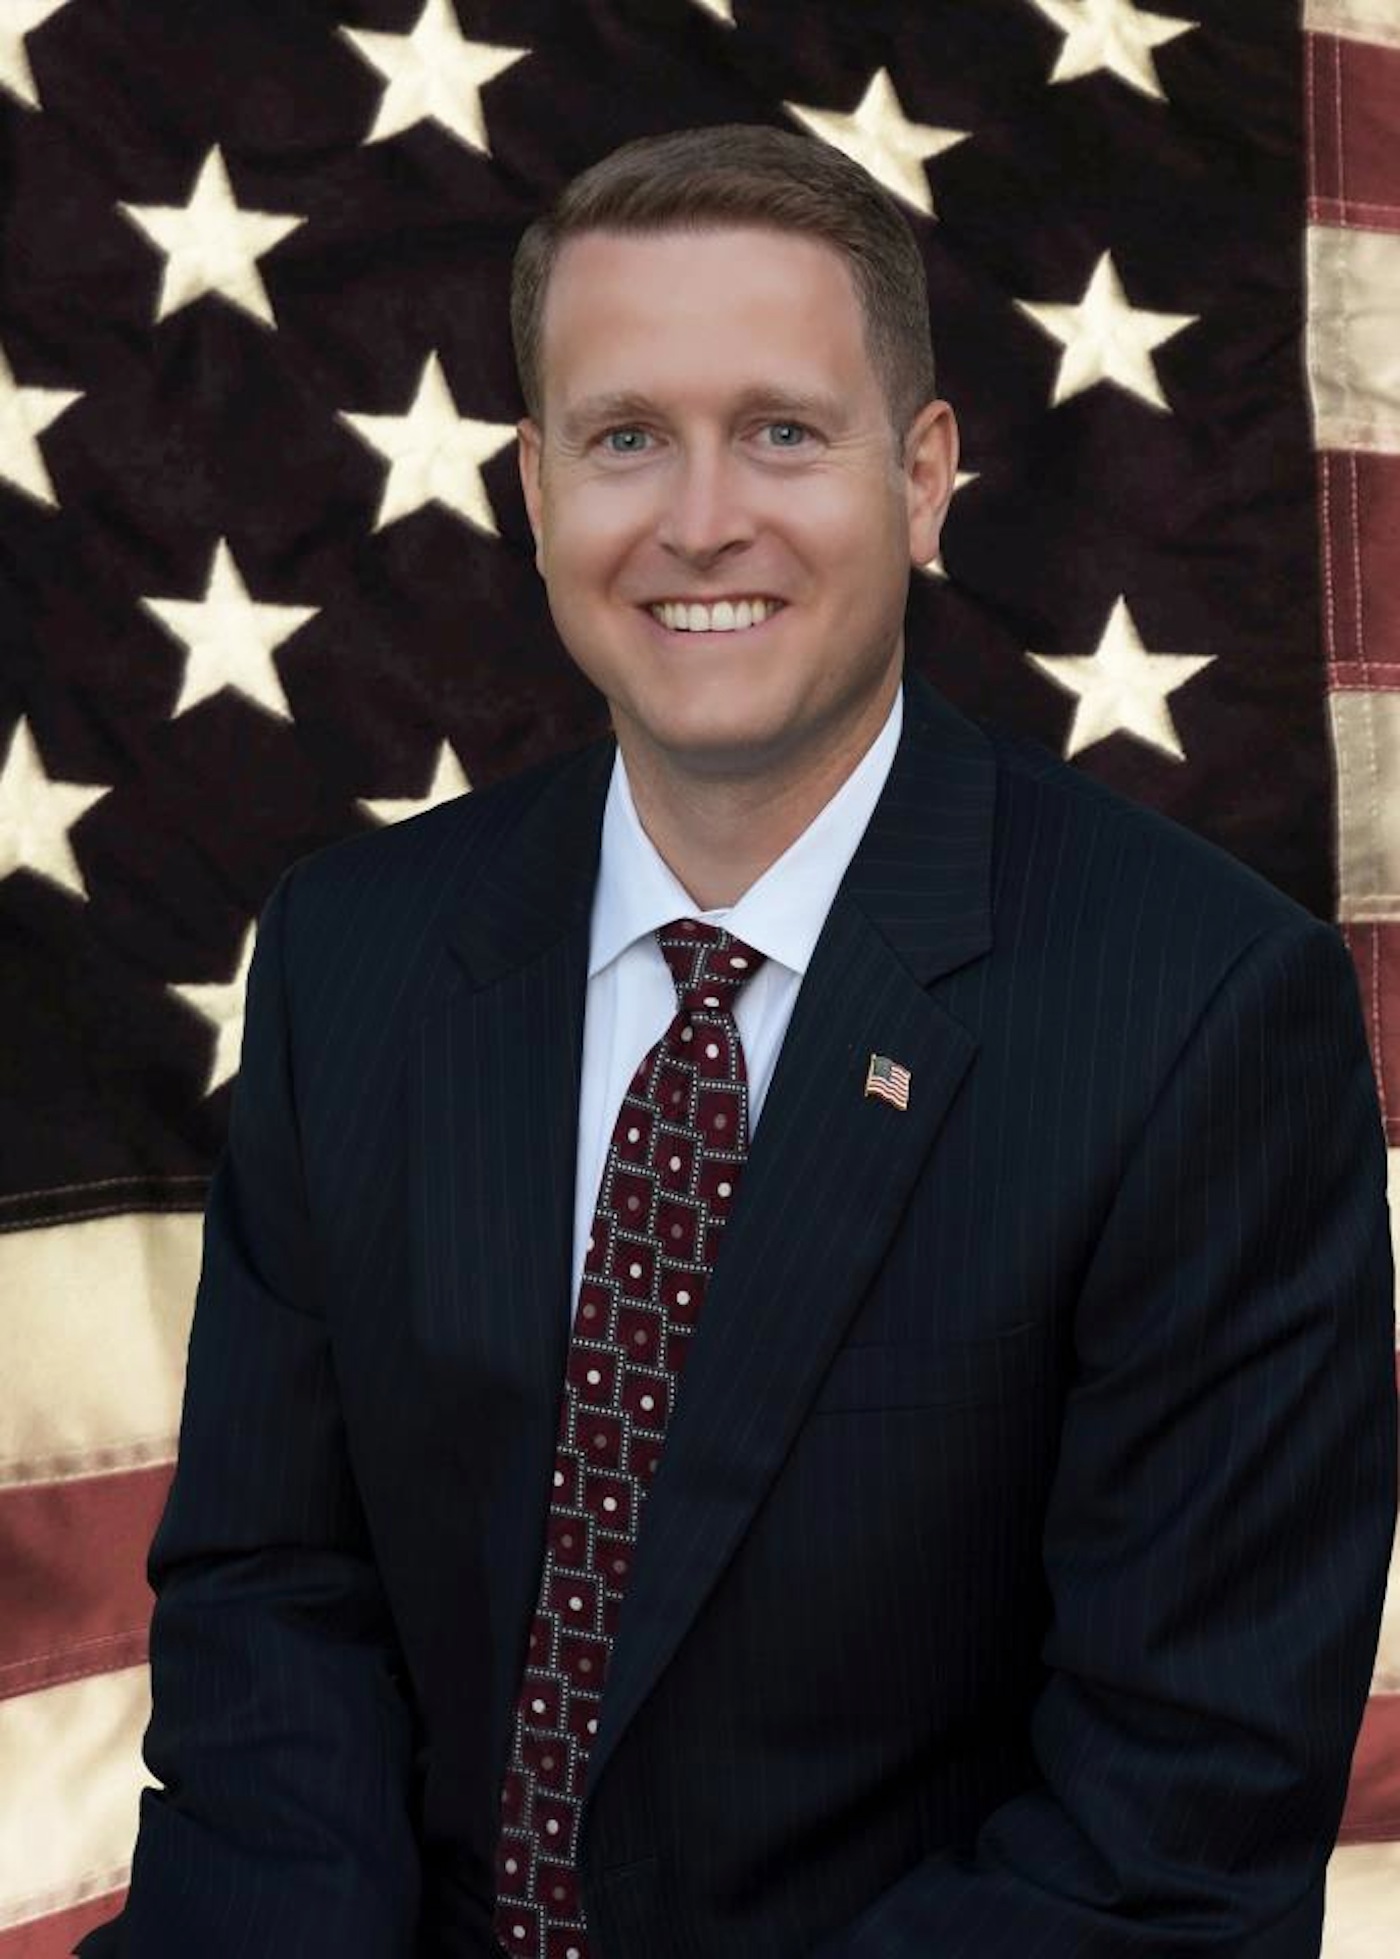 PATRIOT RADIO 6/21/2016 with Mike Volz (WA State Representative Candidate Dist. 6)